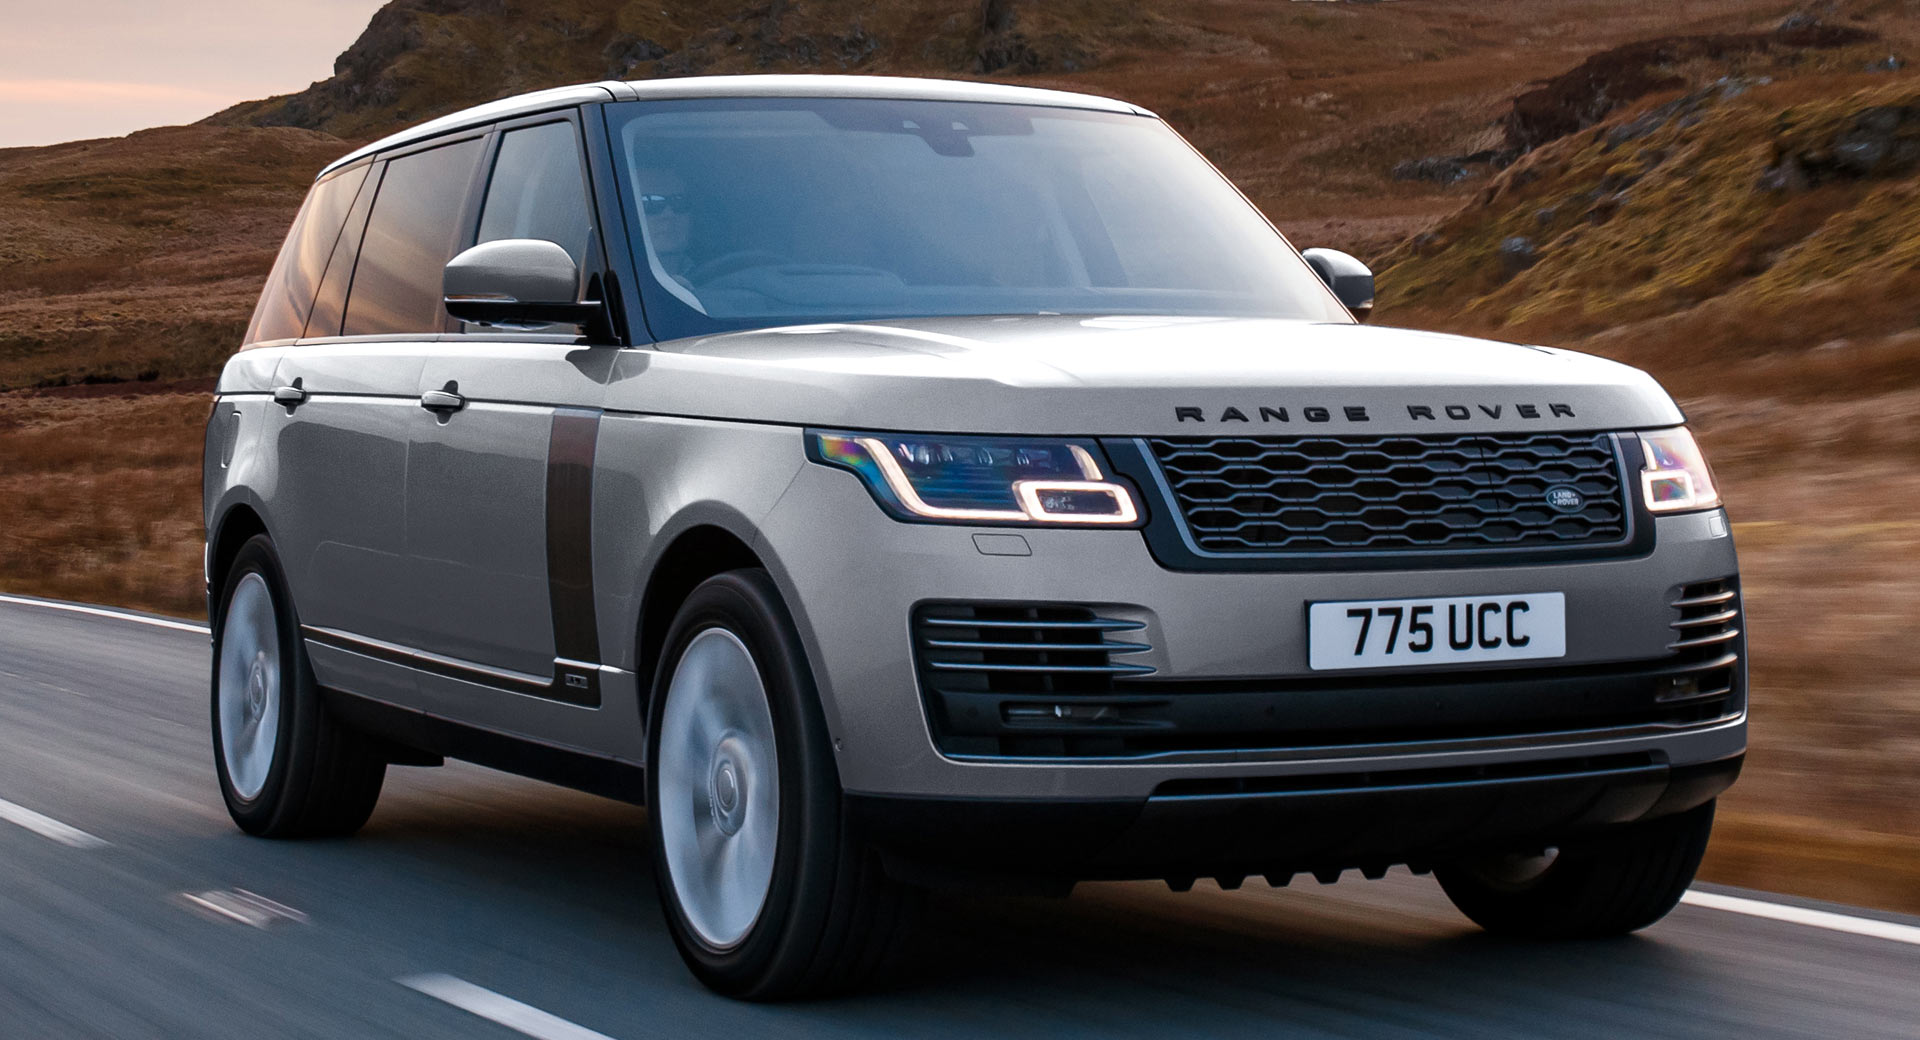  2022  Range  Rover  To Get Hybrid PHEV And Electric 